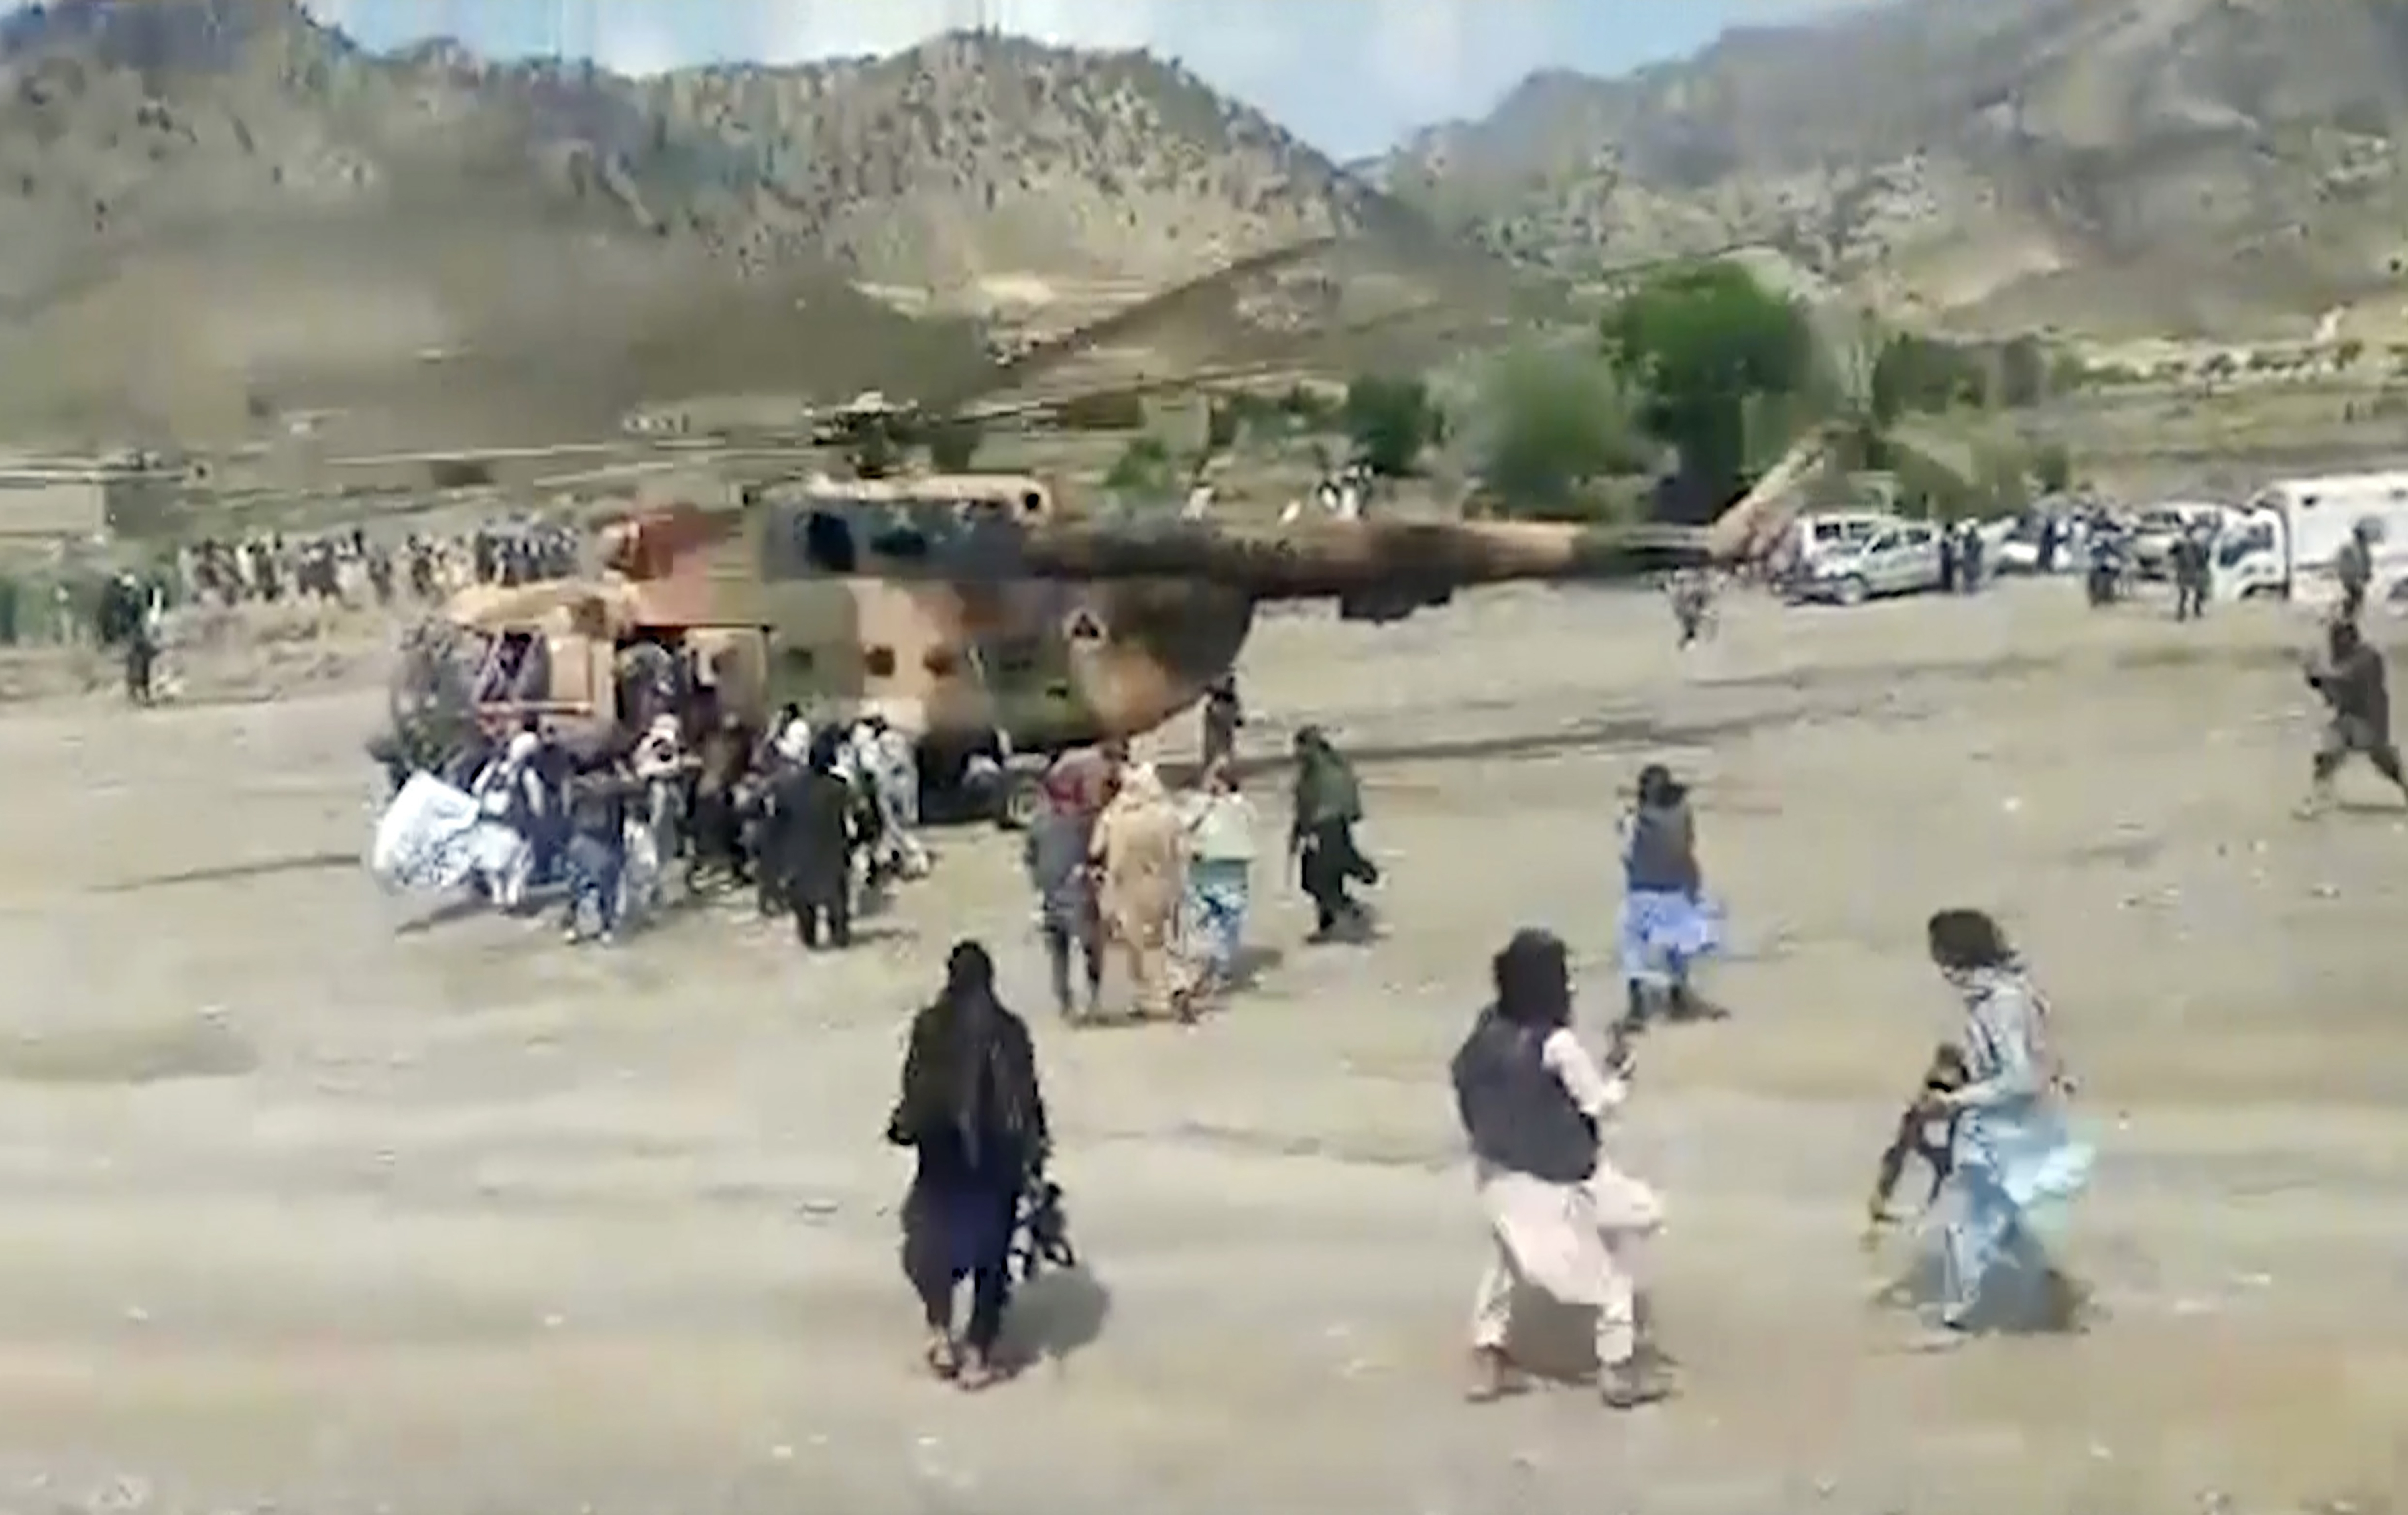 Taliban fighters secure a government helicopter to evacuate injured people in Gayan district, Paktika province, Afghanistan